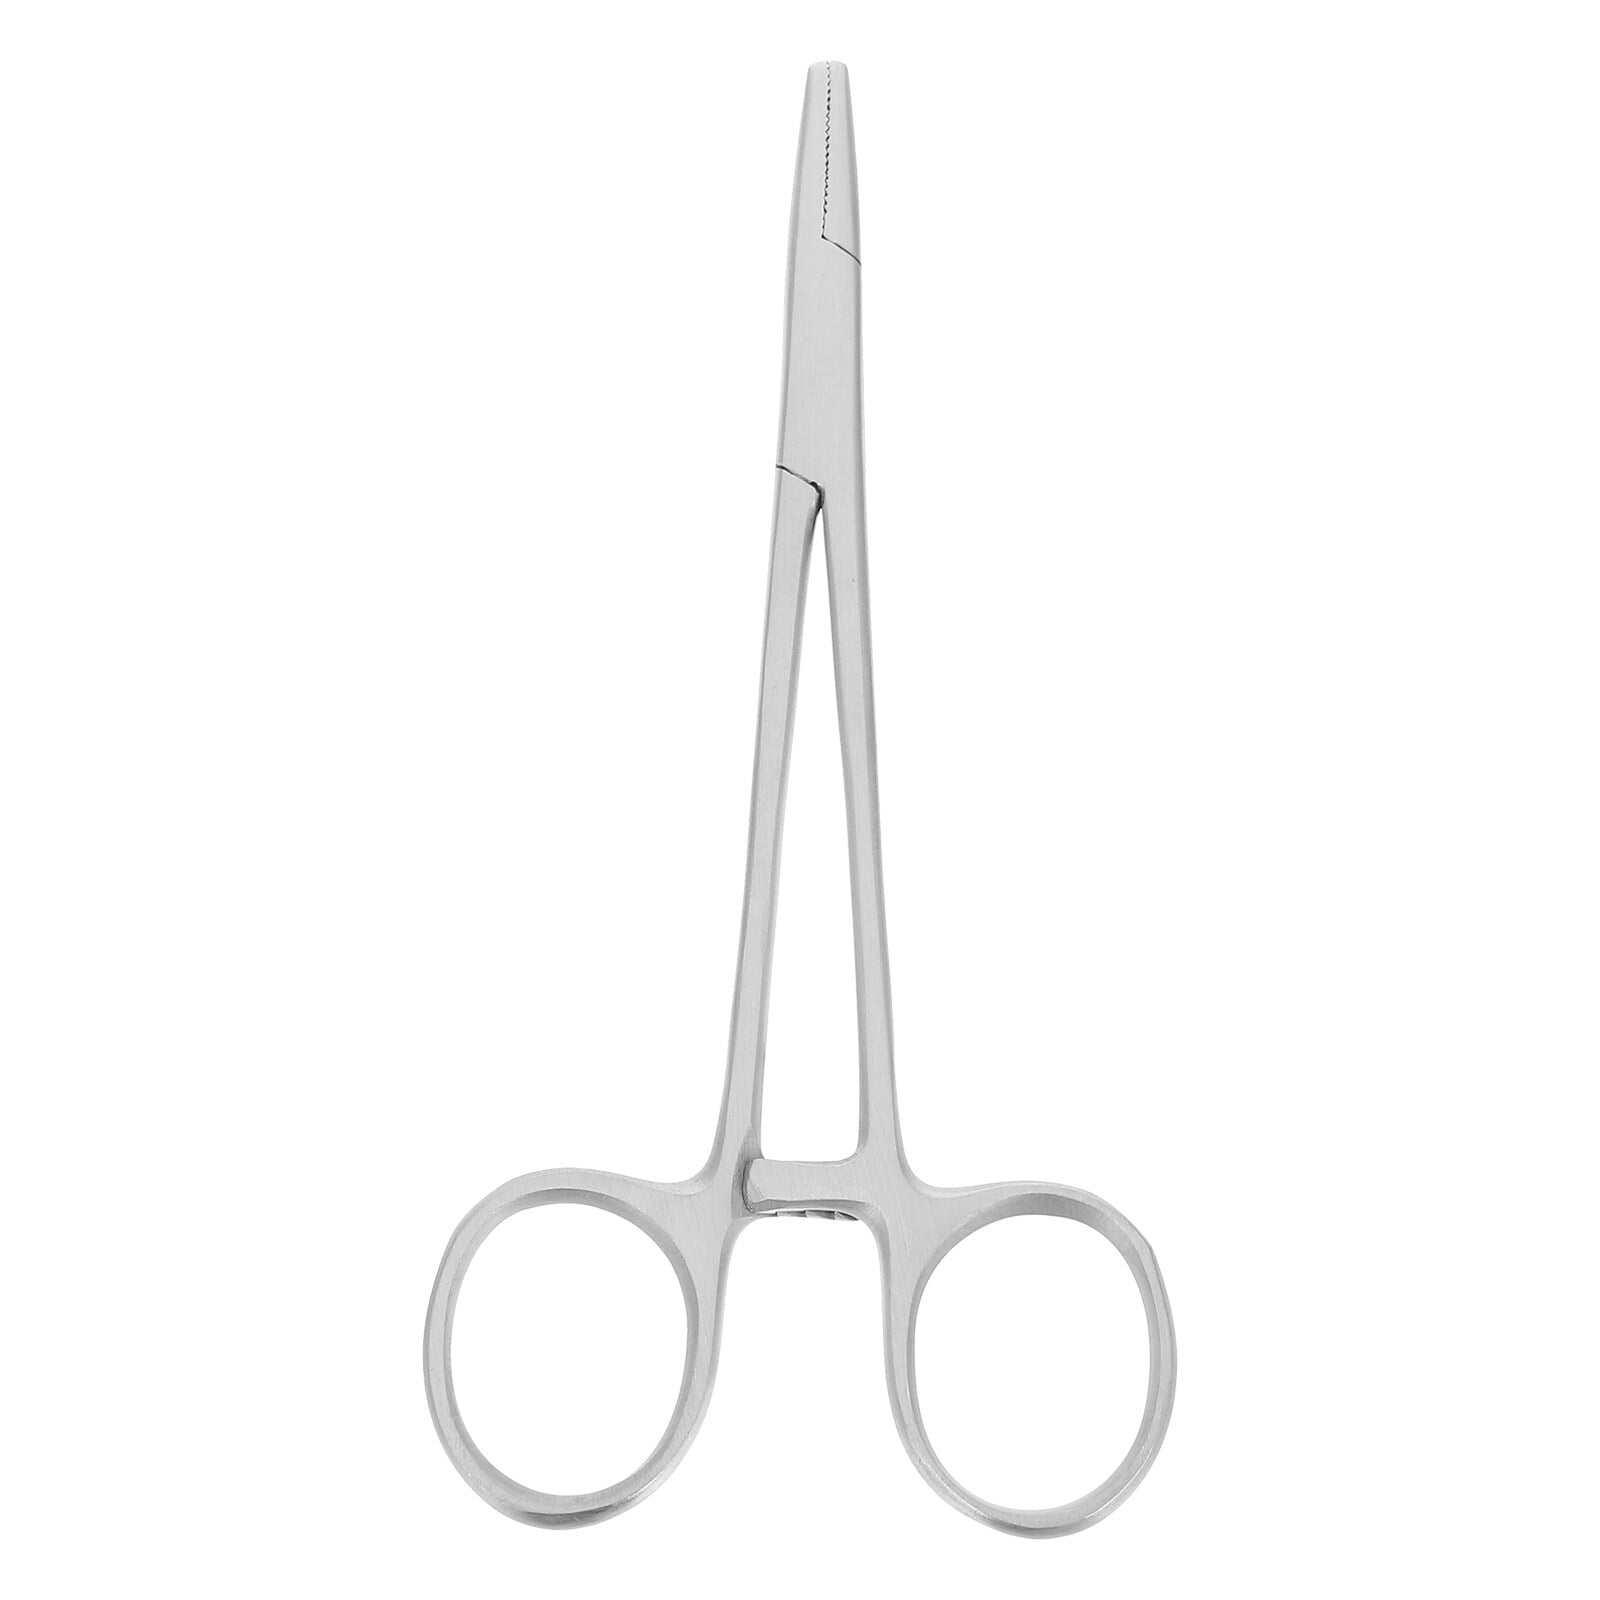 8' Straight & Curved Kamashaga Forceps, Fly Fishing Forceps, Scissors,  Nippers, Fishing Tackle - China Fishing and Fishing Tackle price